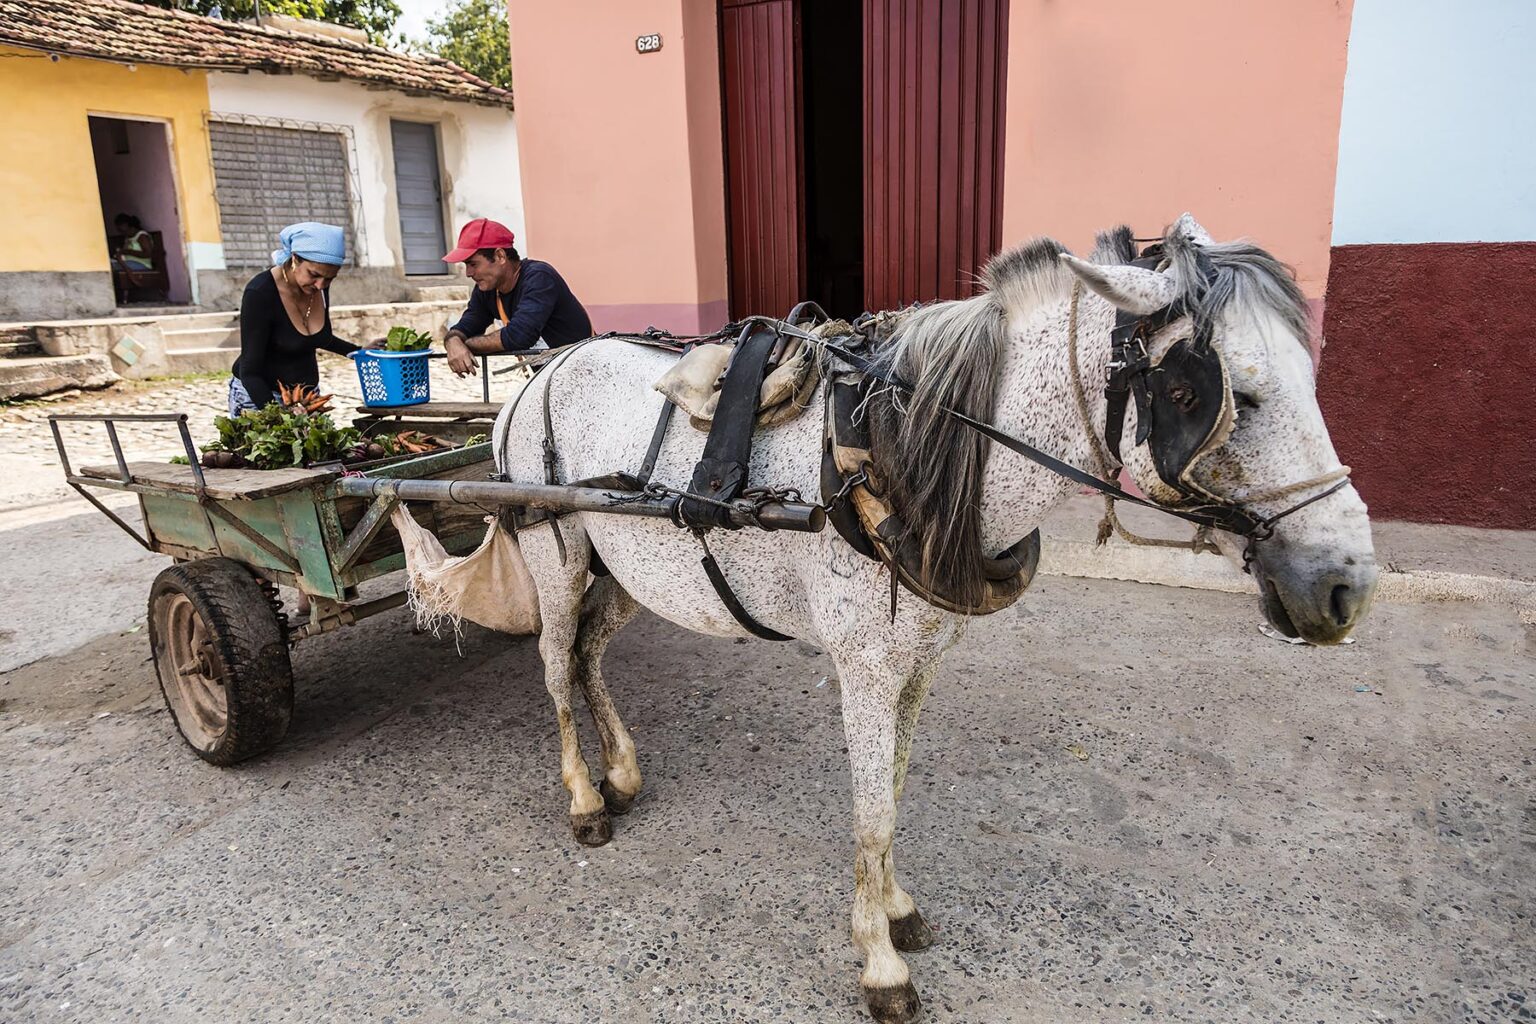 A horse cart is used to sell vegetables - TRINIDAD, CUBA